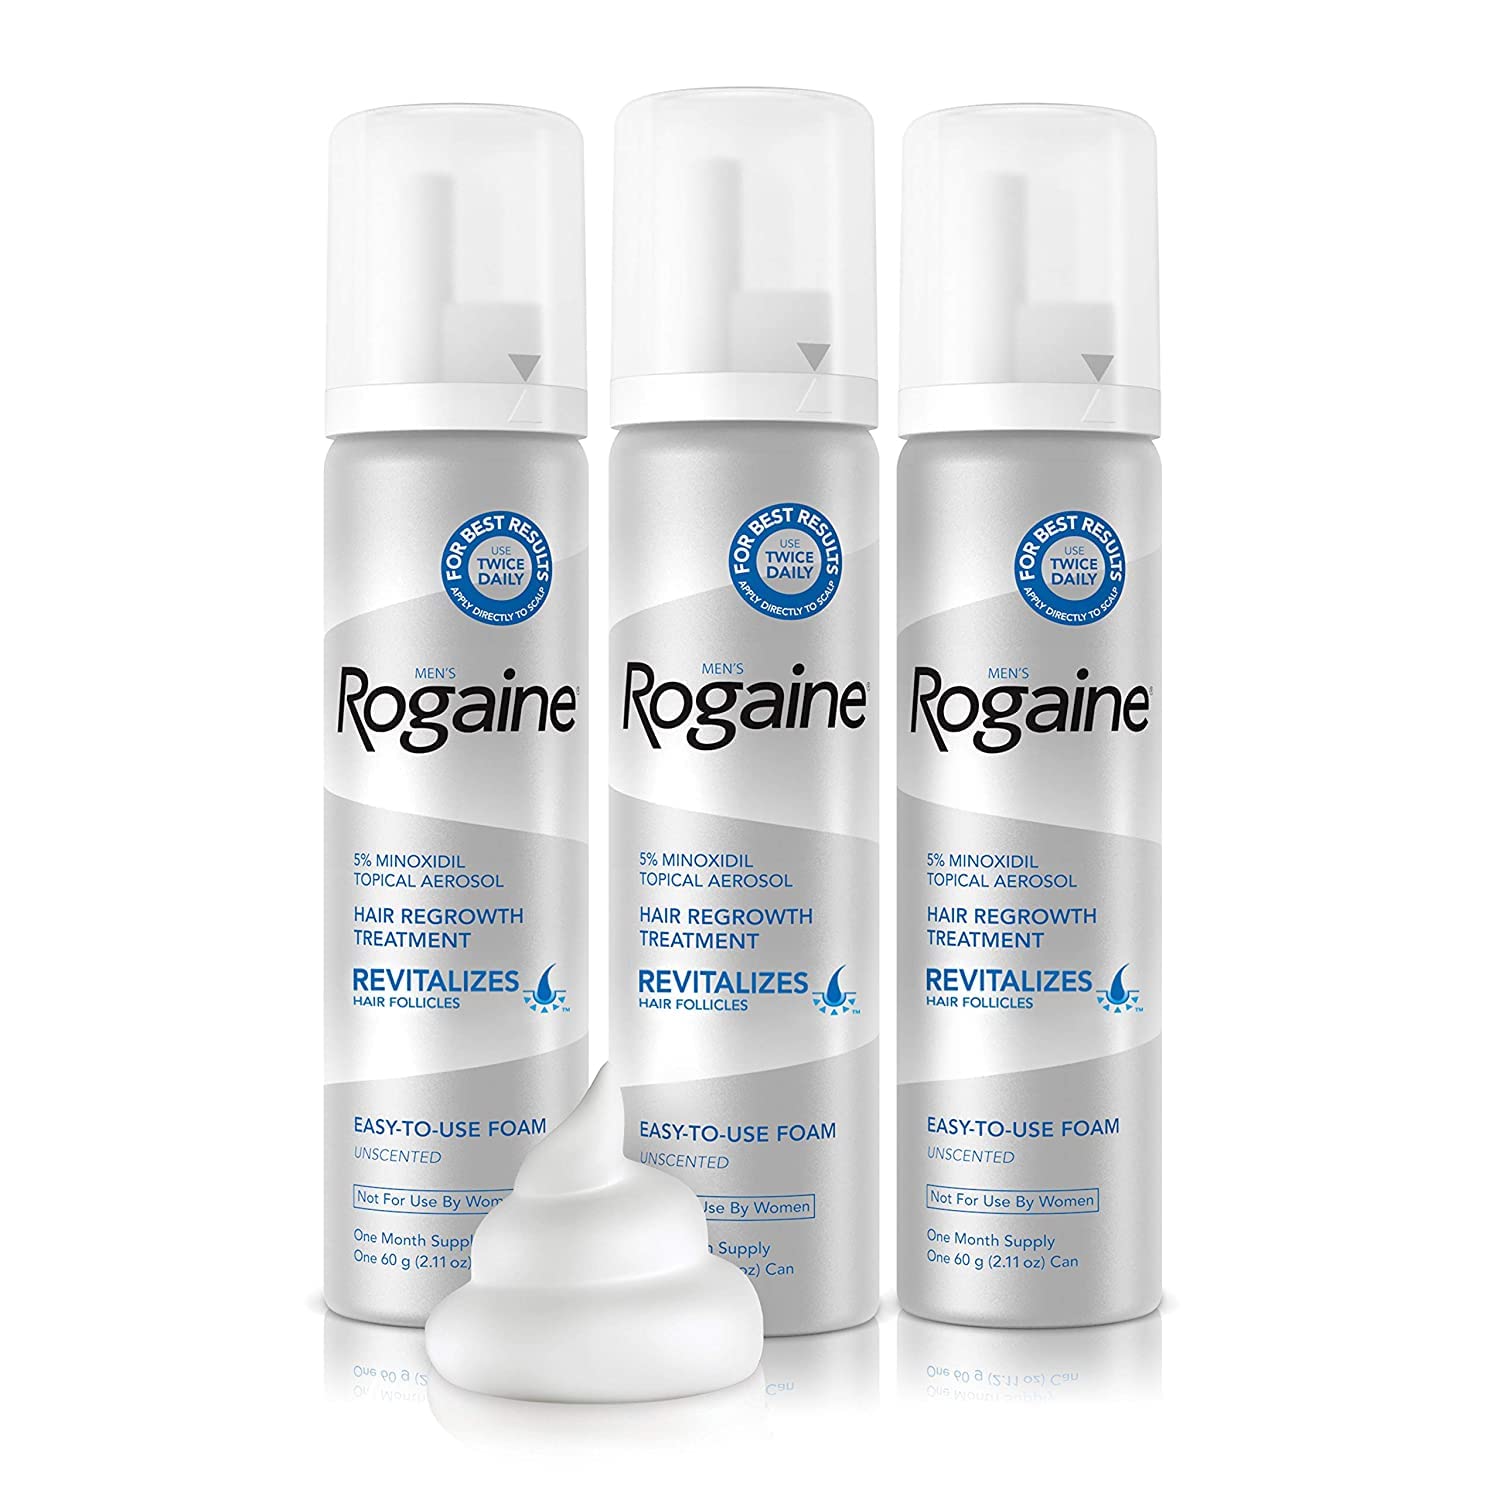 Rogaine for Men Hair Regrowth Treatment, Easy-to-Use Foam, 6 Month Supply (6 Packs- 2.11 oz Cans)